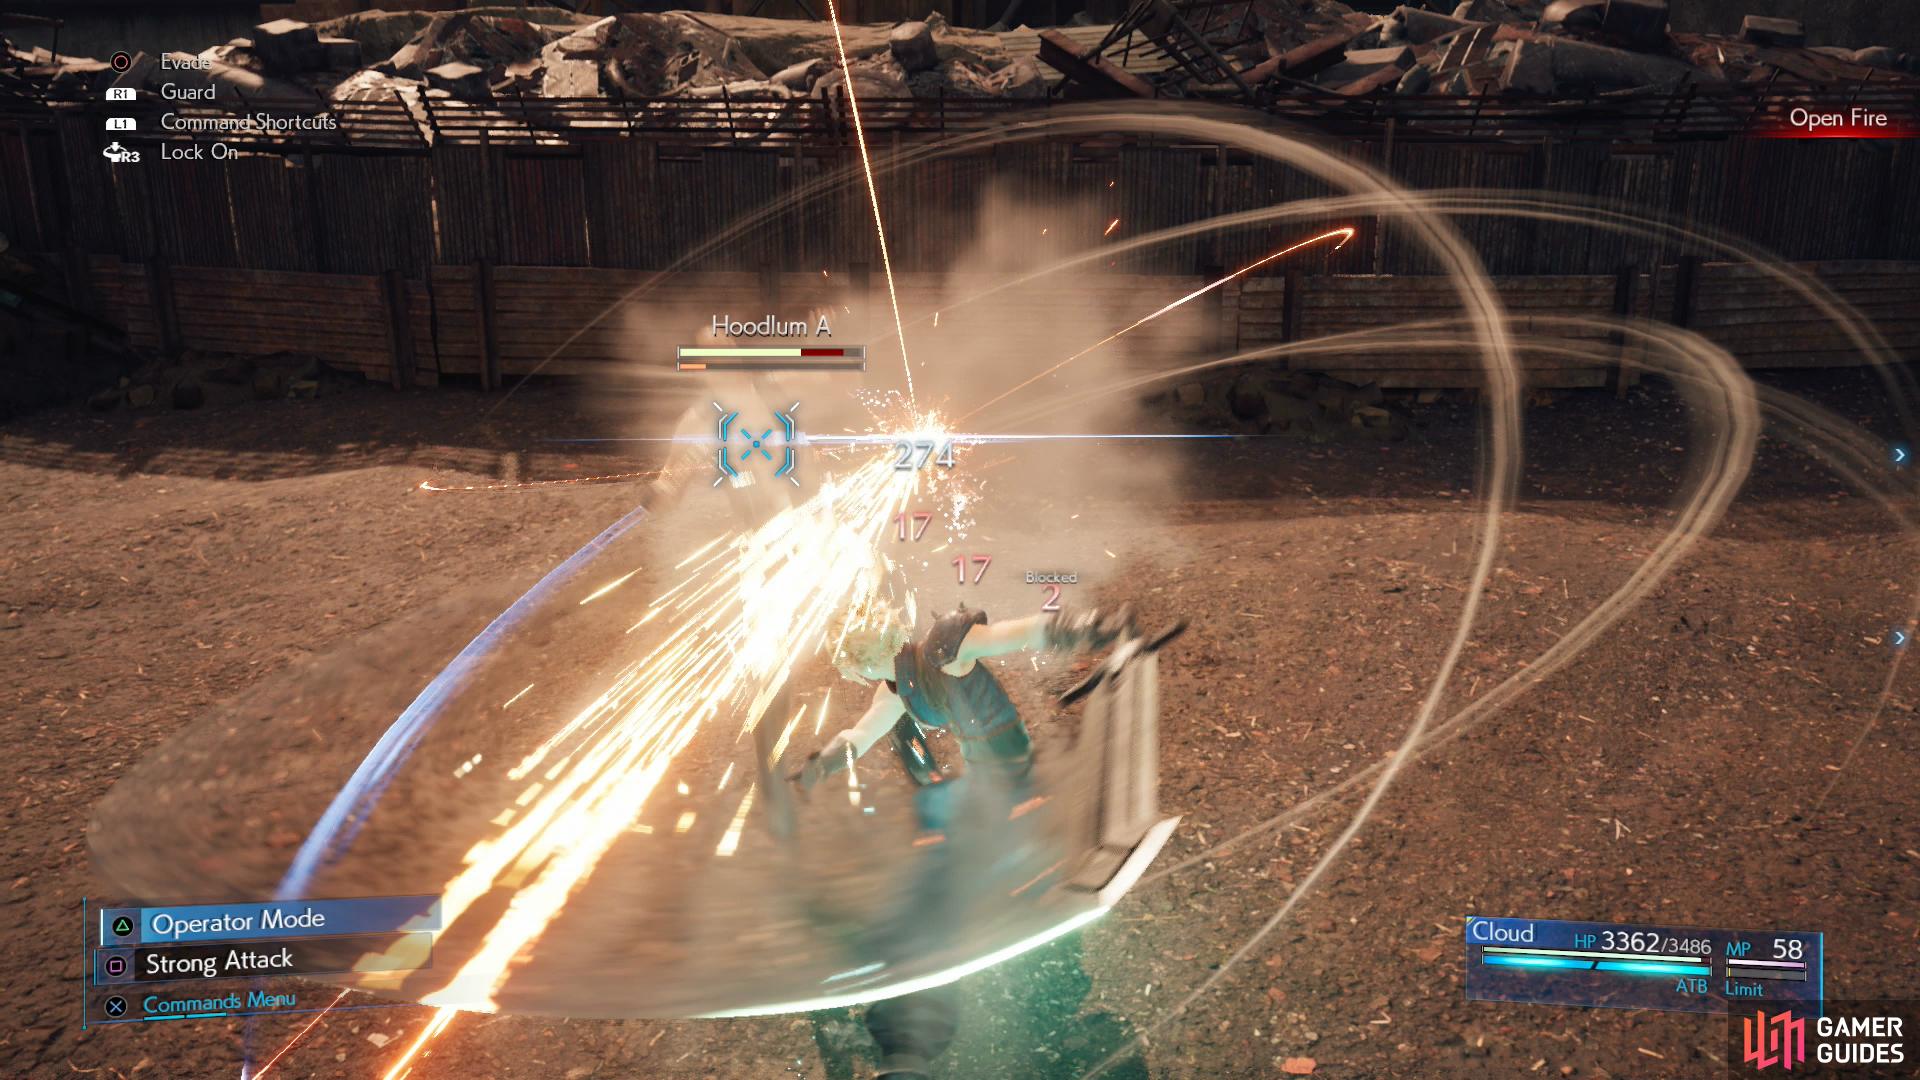 but Punisher mode's Counterattack ability works well, too.